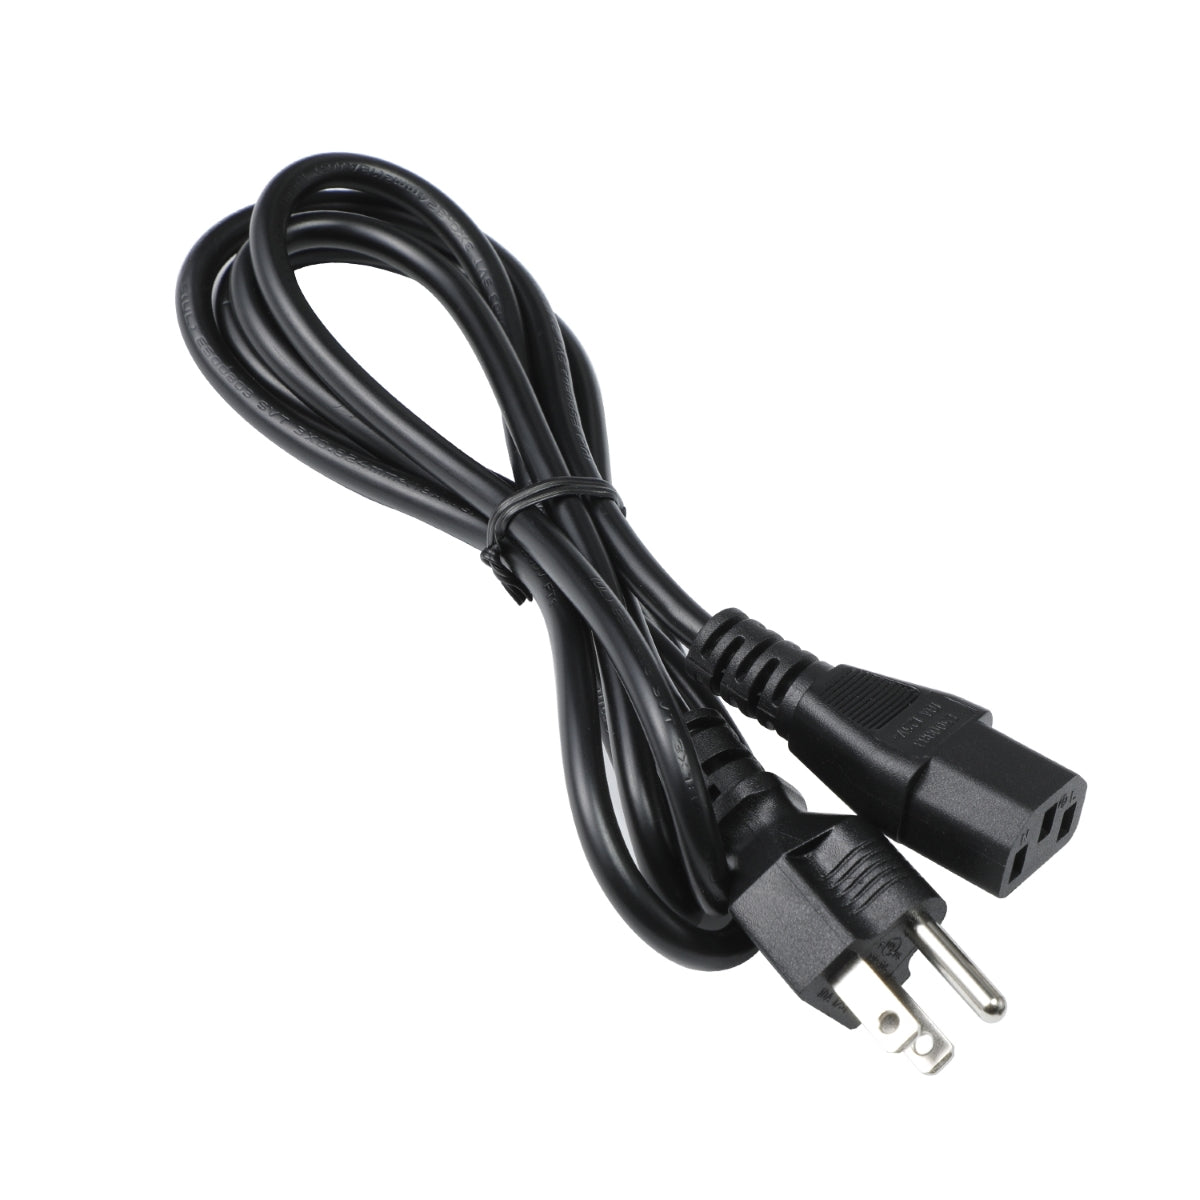 Power Cord for HP Pavilion 550-310 Computer.